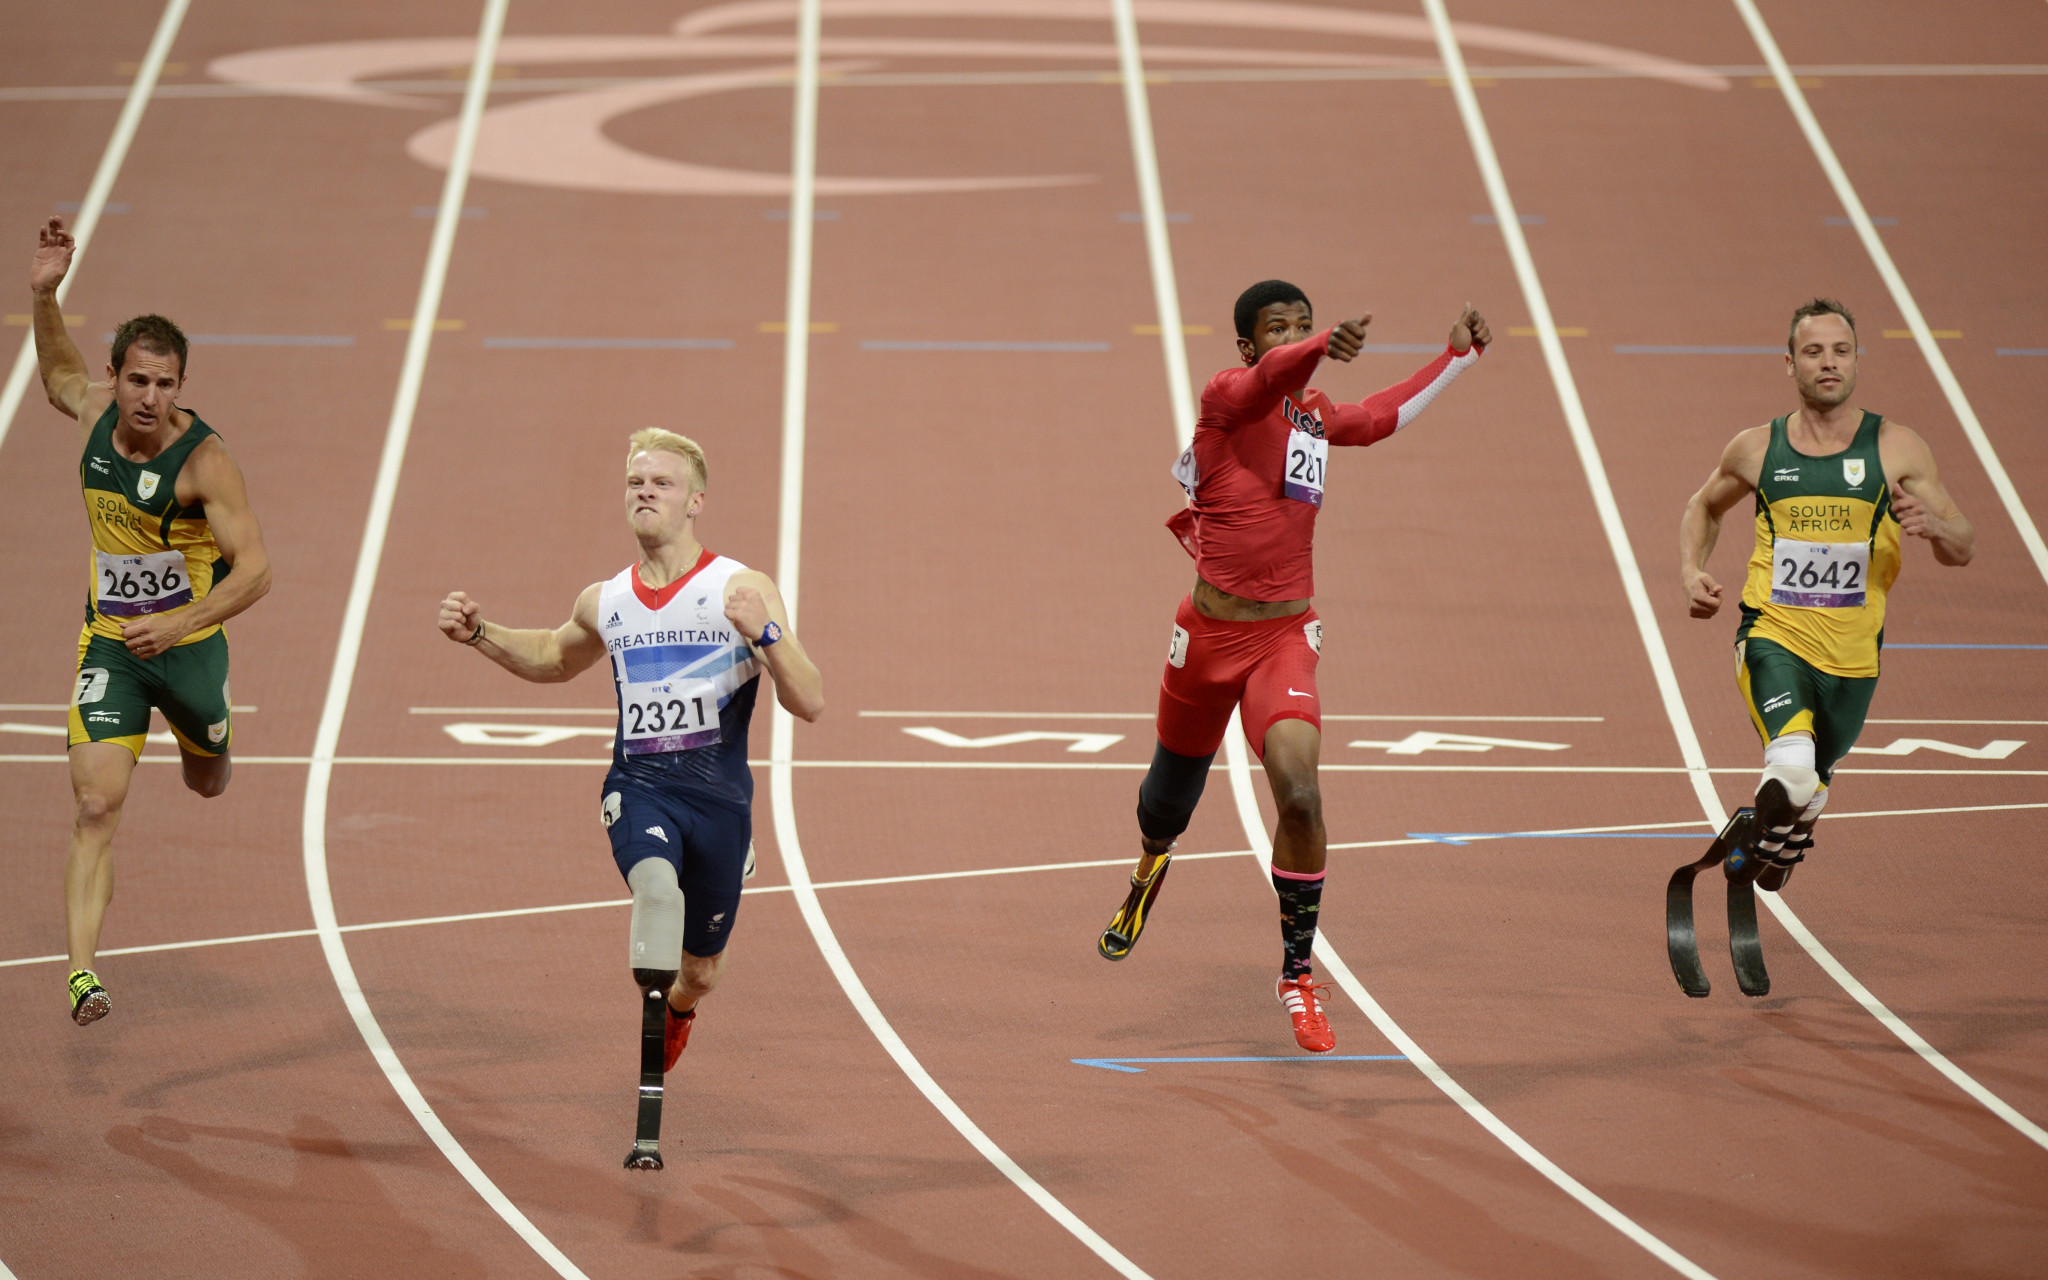 IPC and UN team up for campaign marking positive legacies of London 2012 Paralympic Games